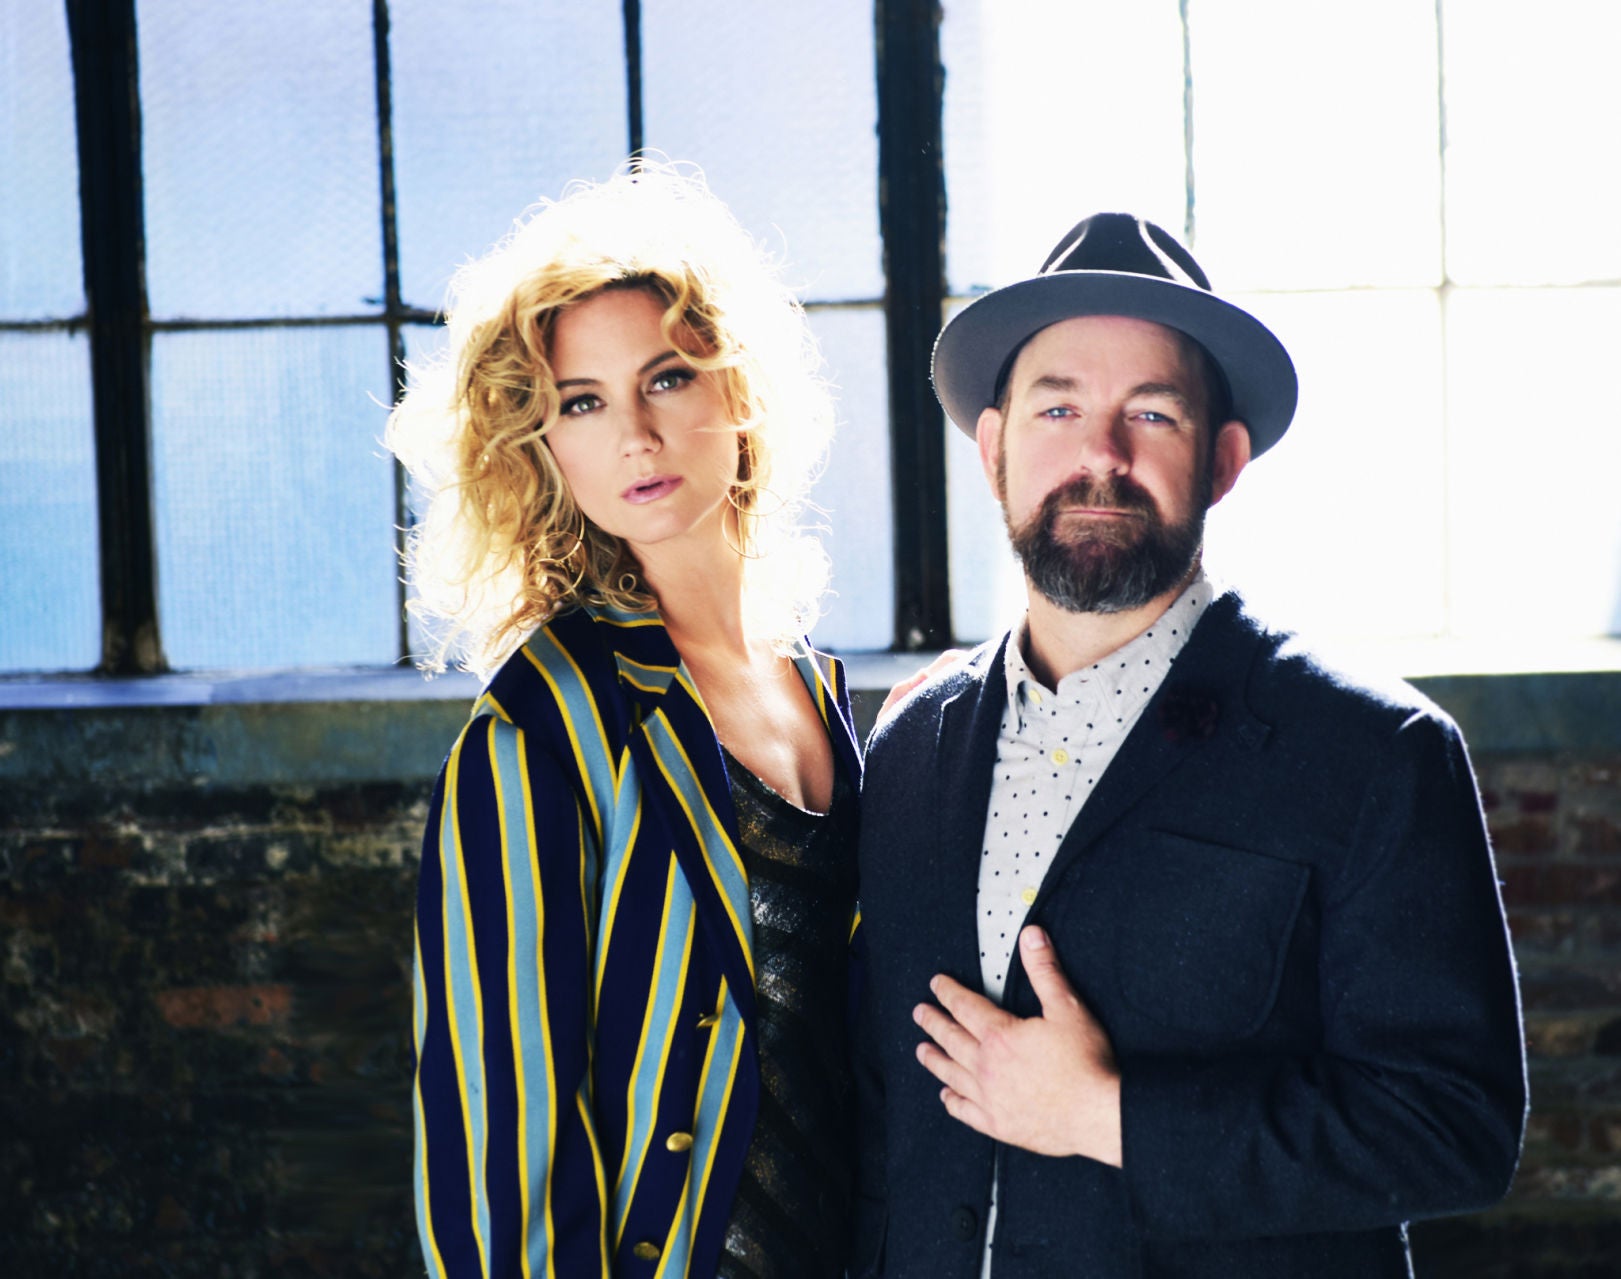 Country music band Sugarland back on tour, making music to ‘make things